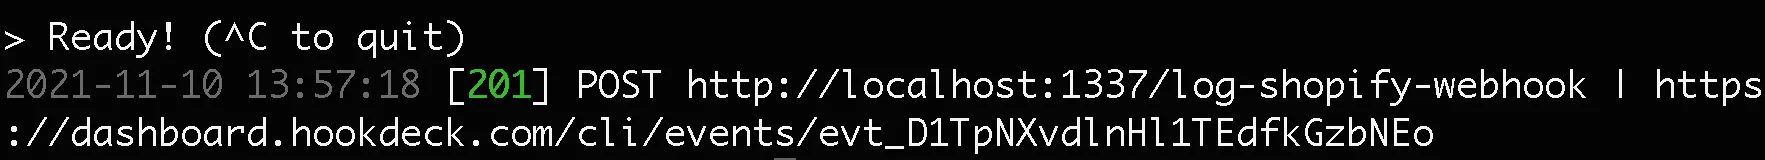 Success receiving Shopify webhook on Localhost with Hookdeck CLI